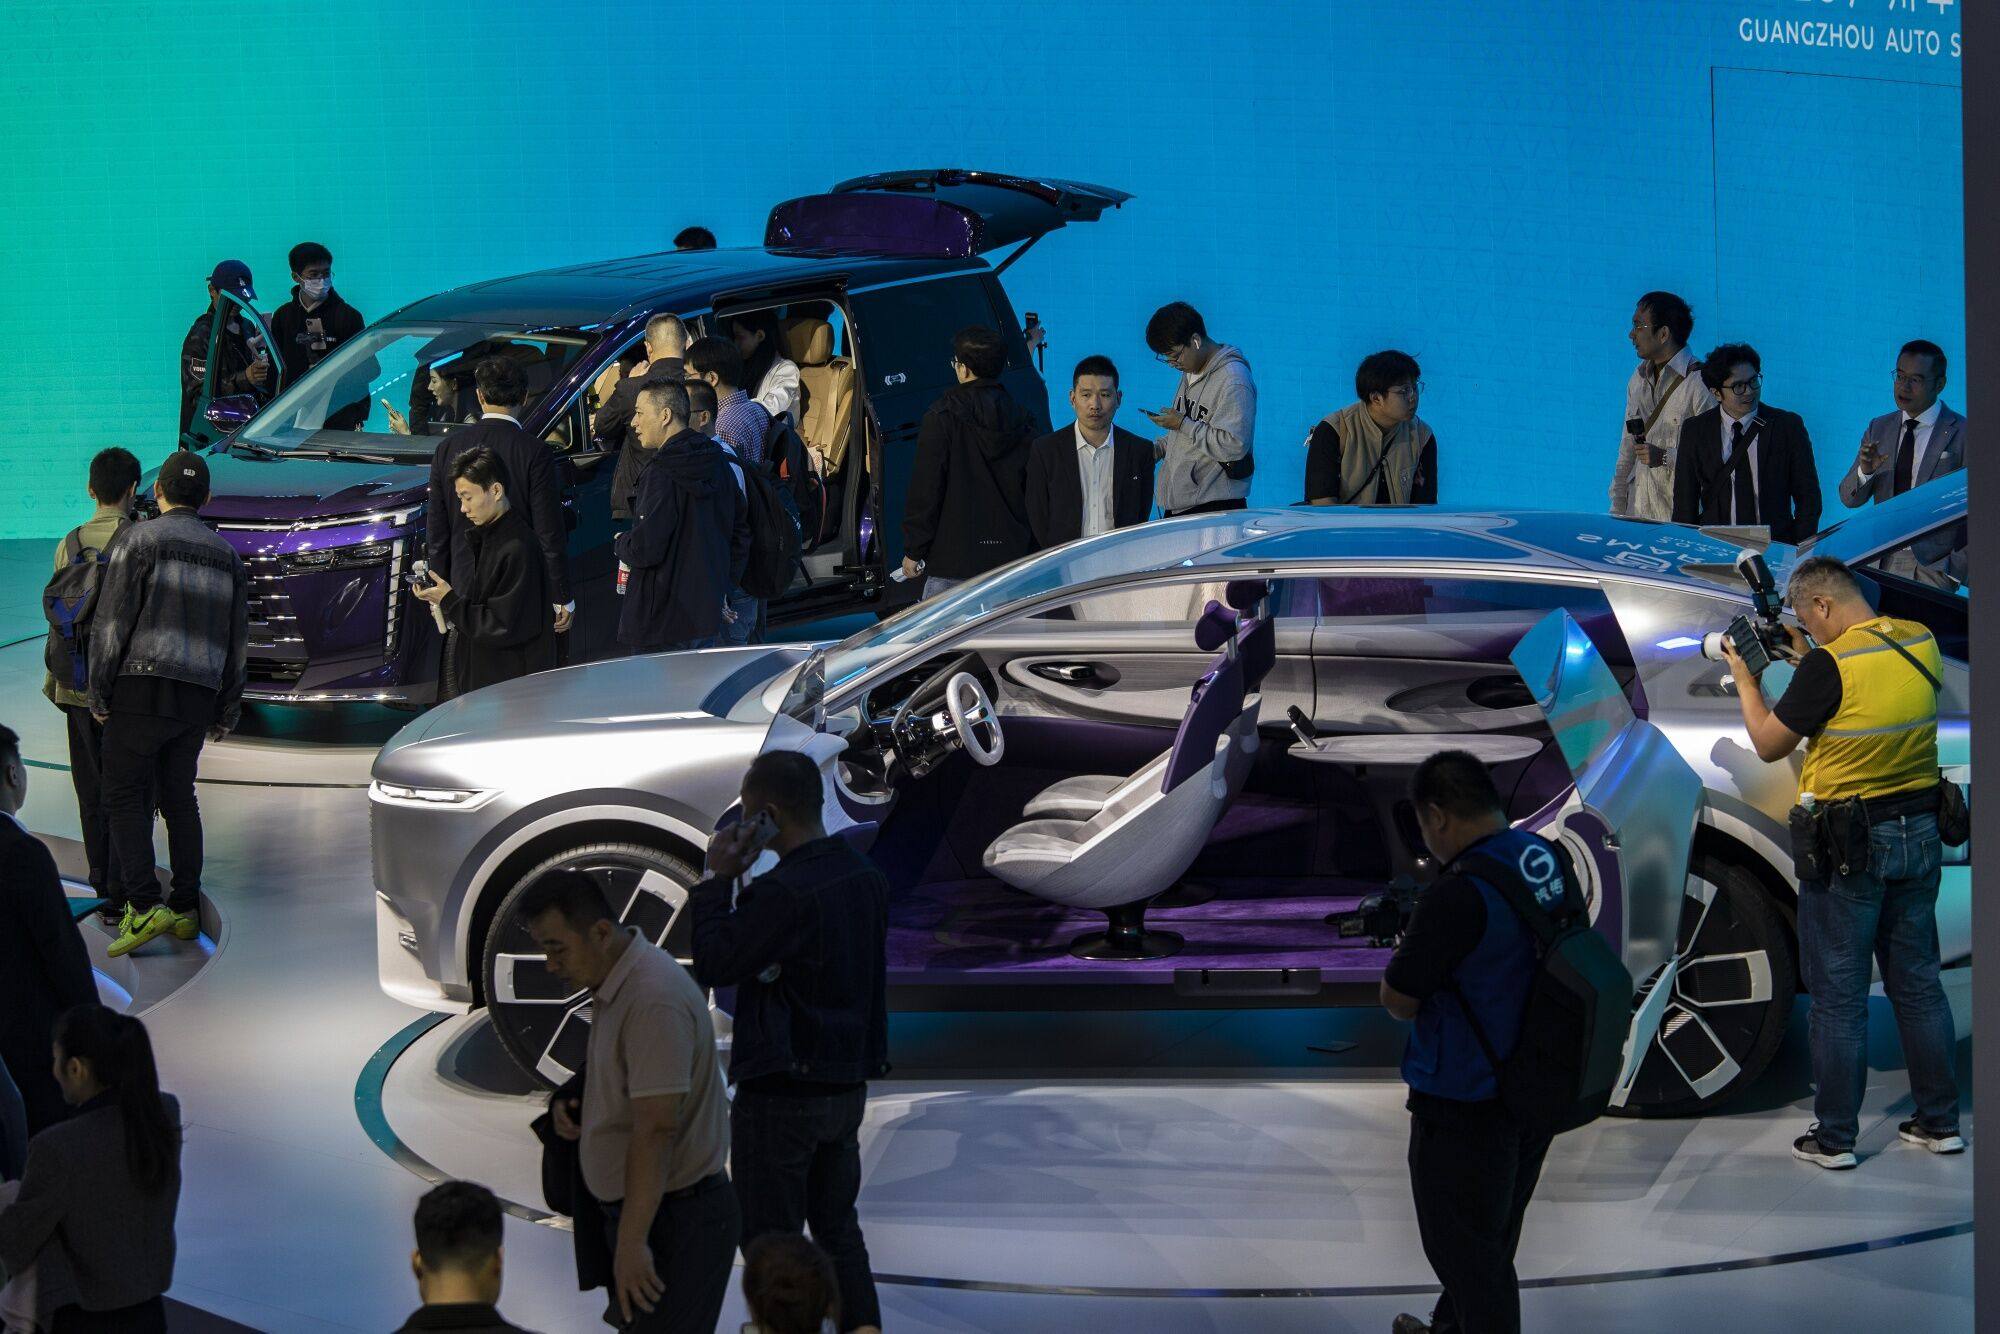 Guangzhou Automobile Group vehicles on display at the Guangzhou Auto Show in Guangzhou, China, on November 17, 2023. Photo: Bloomberg